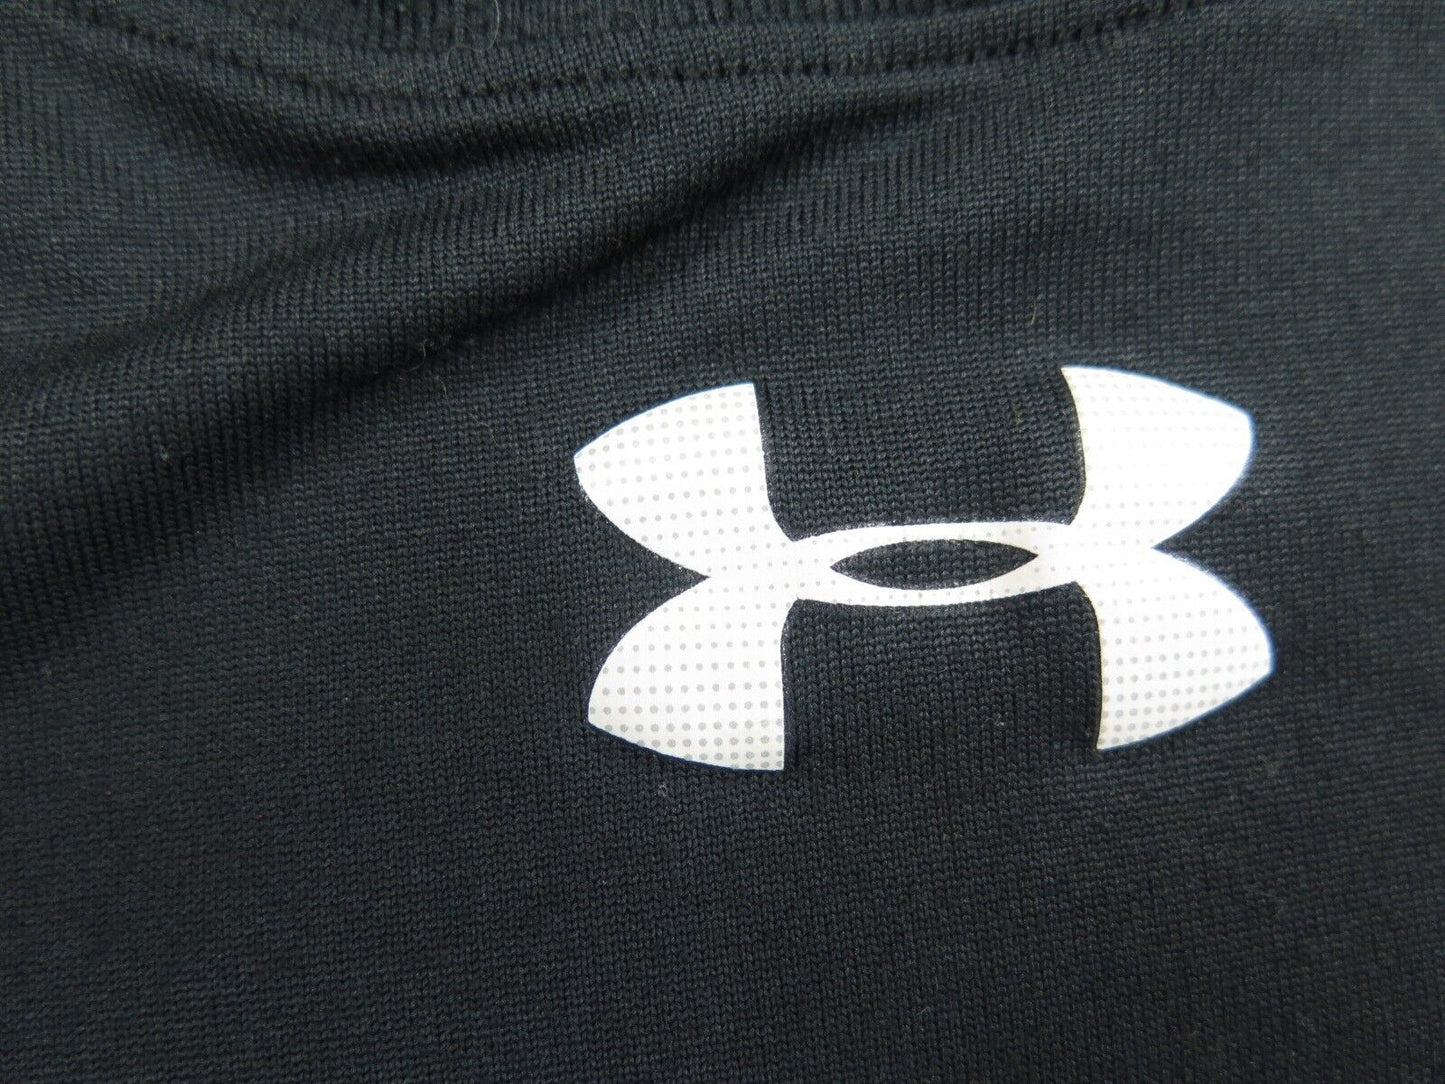 Under Armour Mens Cross Country Baseball Long Sleeve Shirt Top Black Size Large